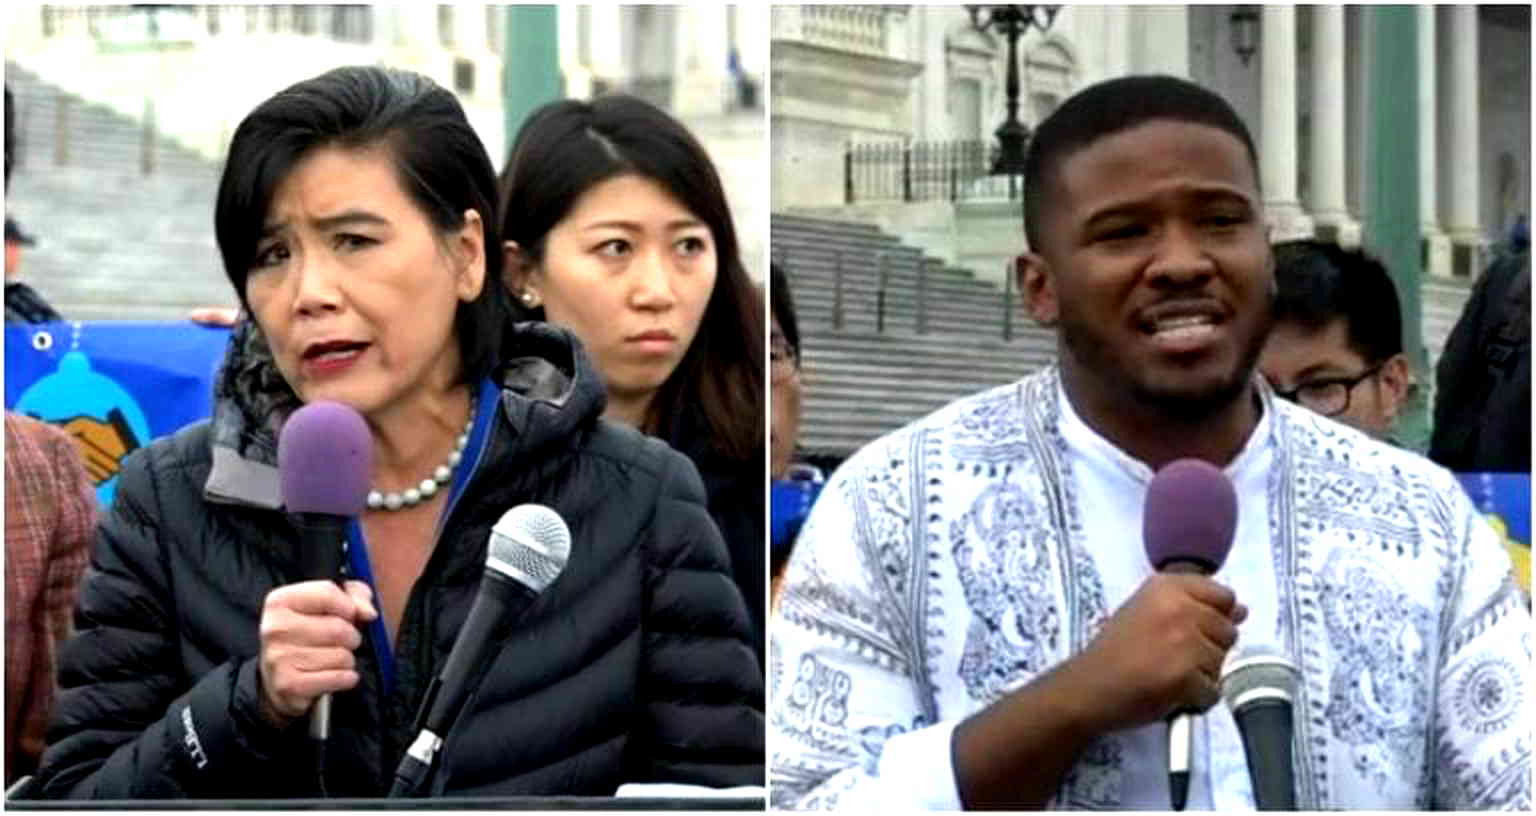 Asian-American and Black Activists Join Forces to Support DACA Recipients